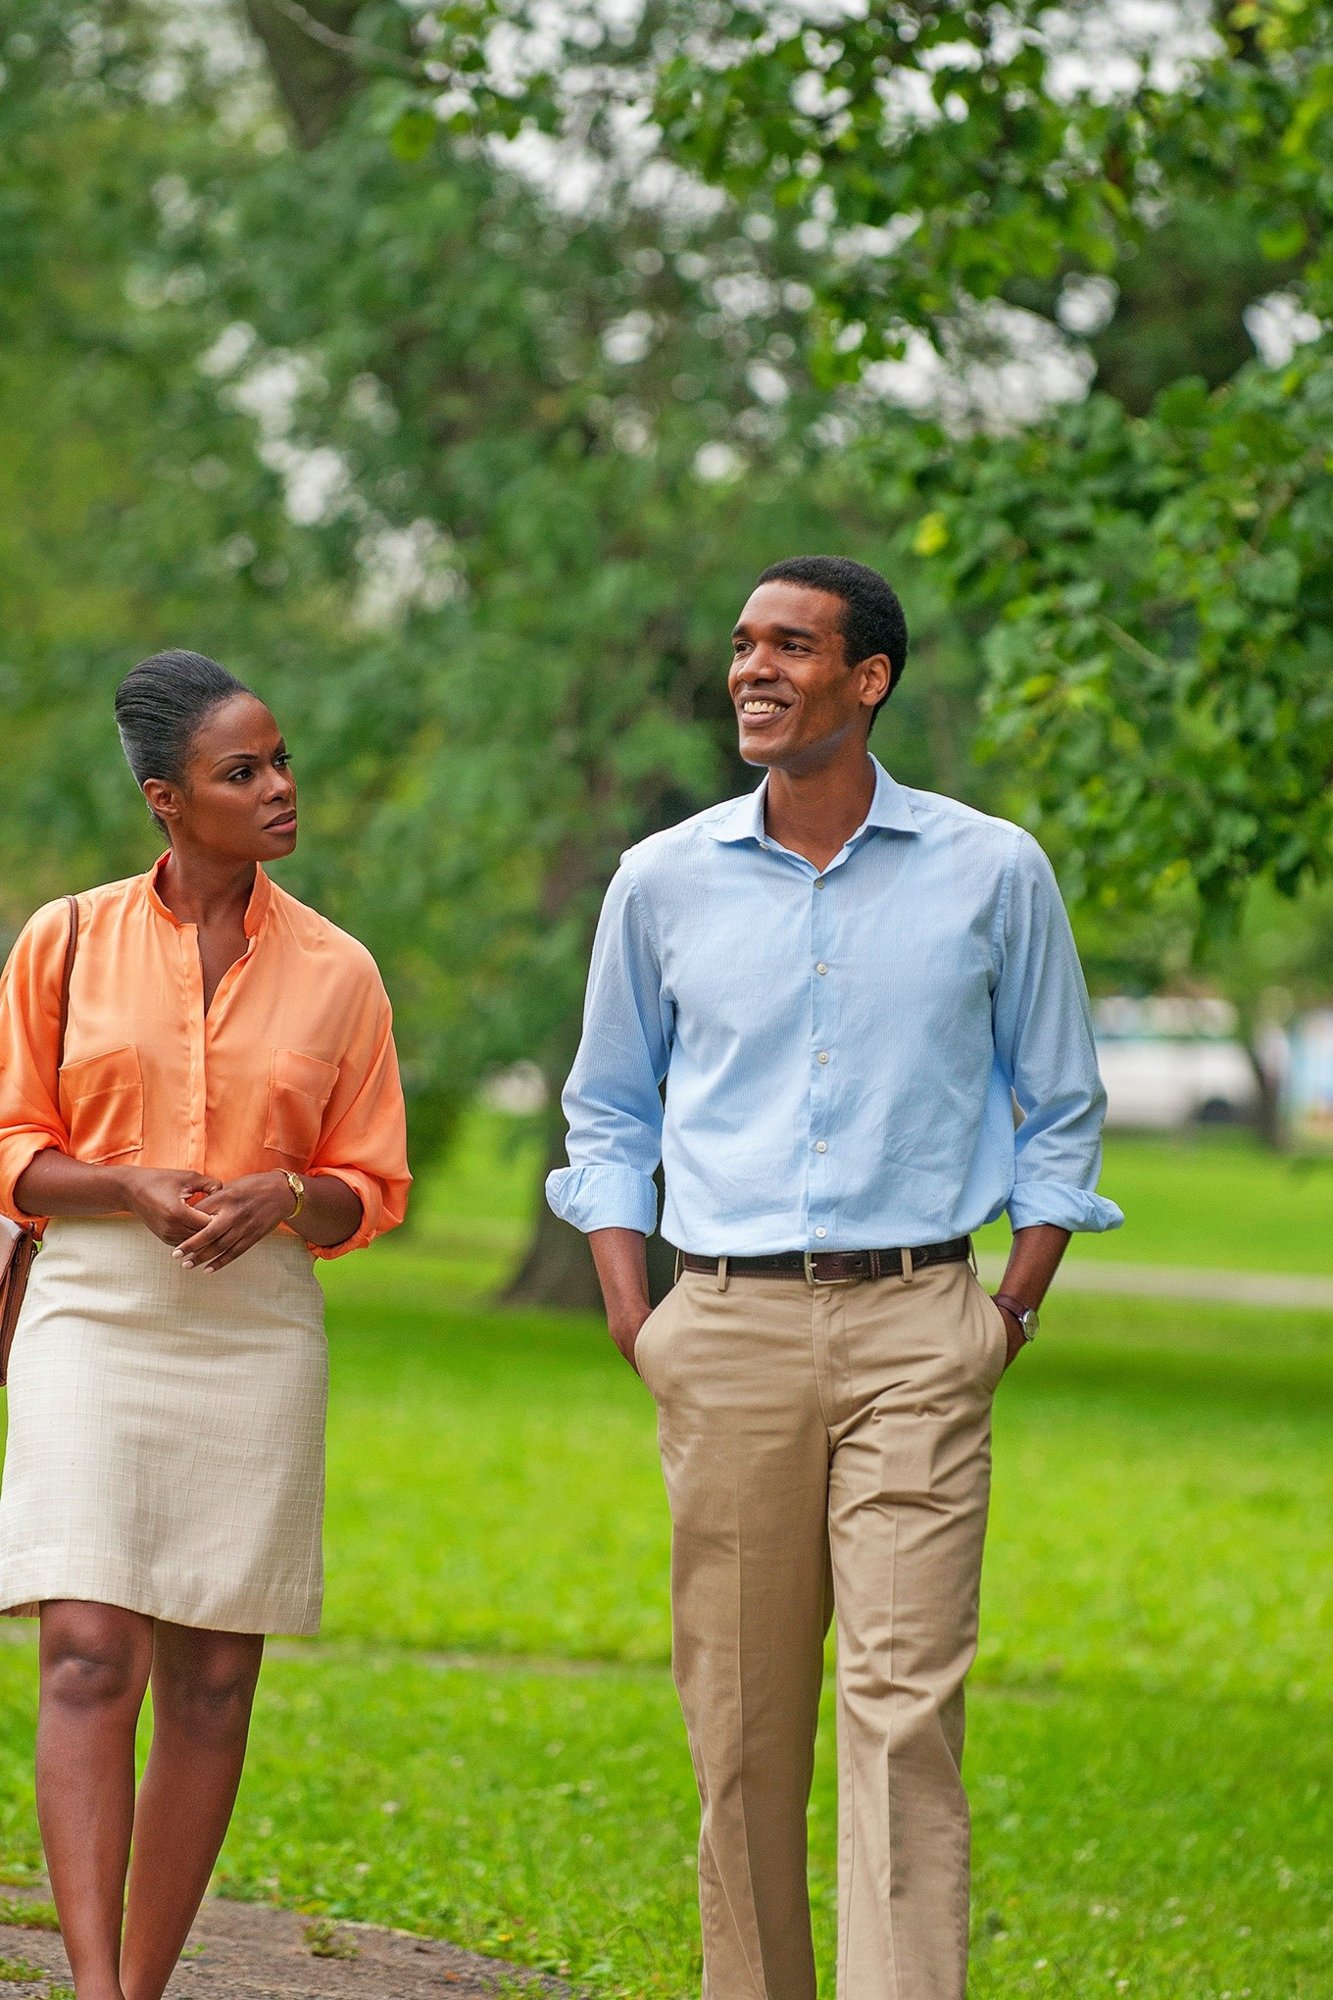 Tika Sumpter stars as Michelle Obama and Parker Sawyers stars as Barack Obama in Roadside Attractions' Southside with You (2016). Photo credit by Matt Dinerstein.